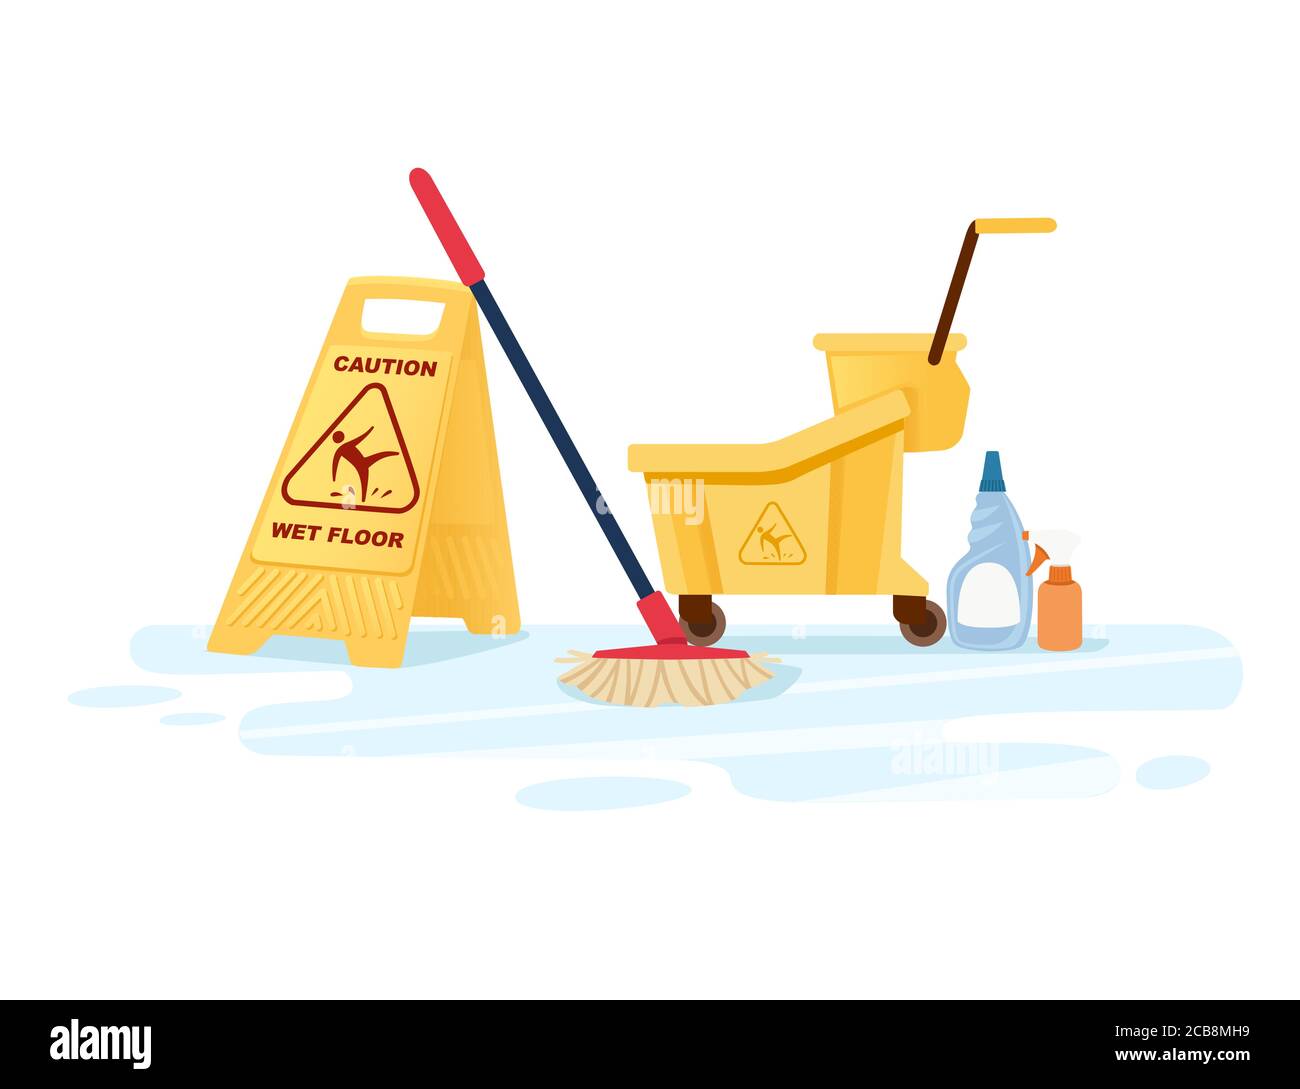 Group of cleaning tools wet floor sign mop bucket and chemical cleaning supplies flat vector illustration on white background Stock Vector